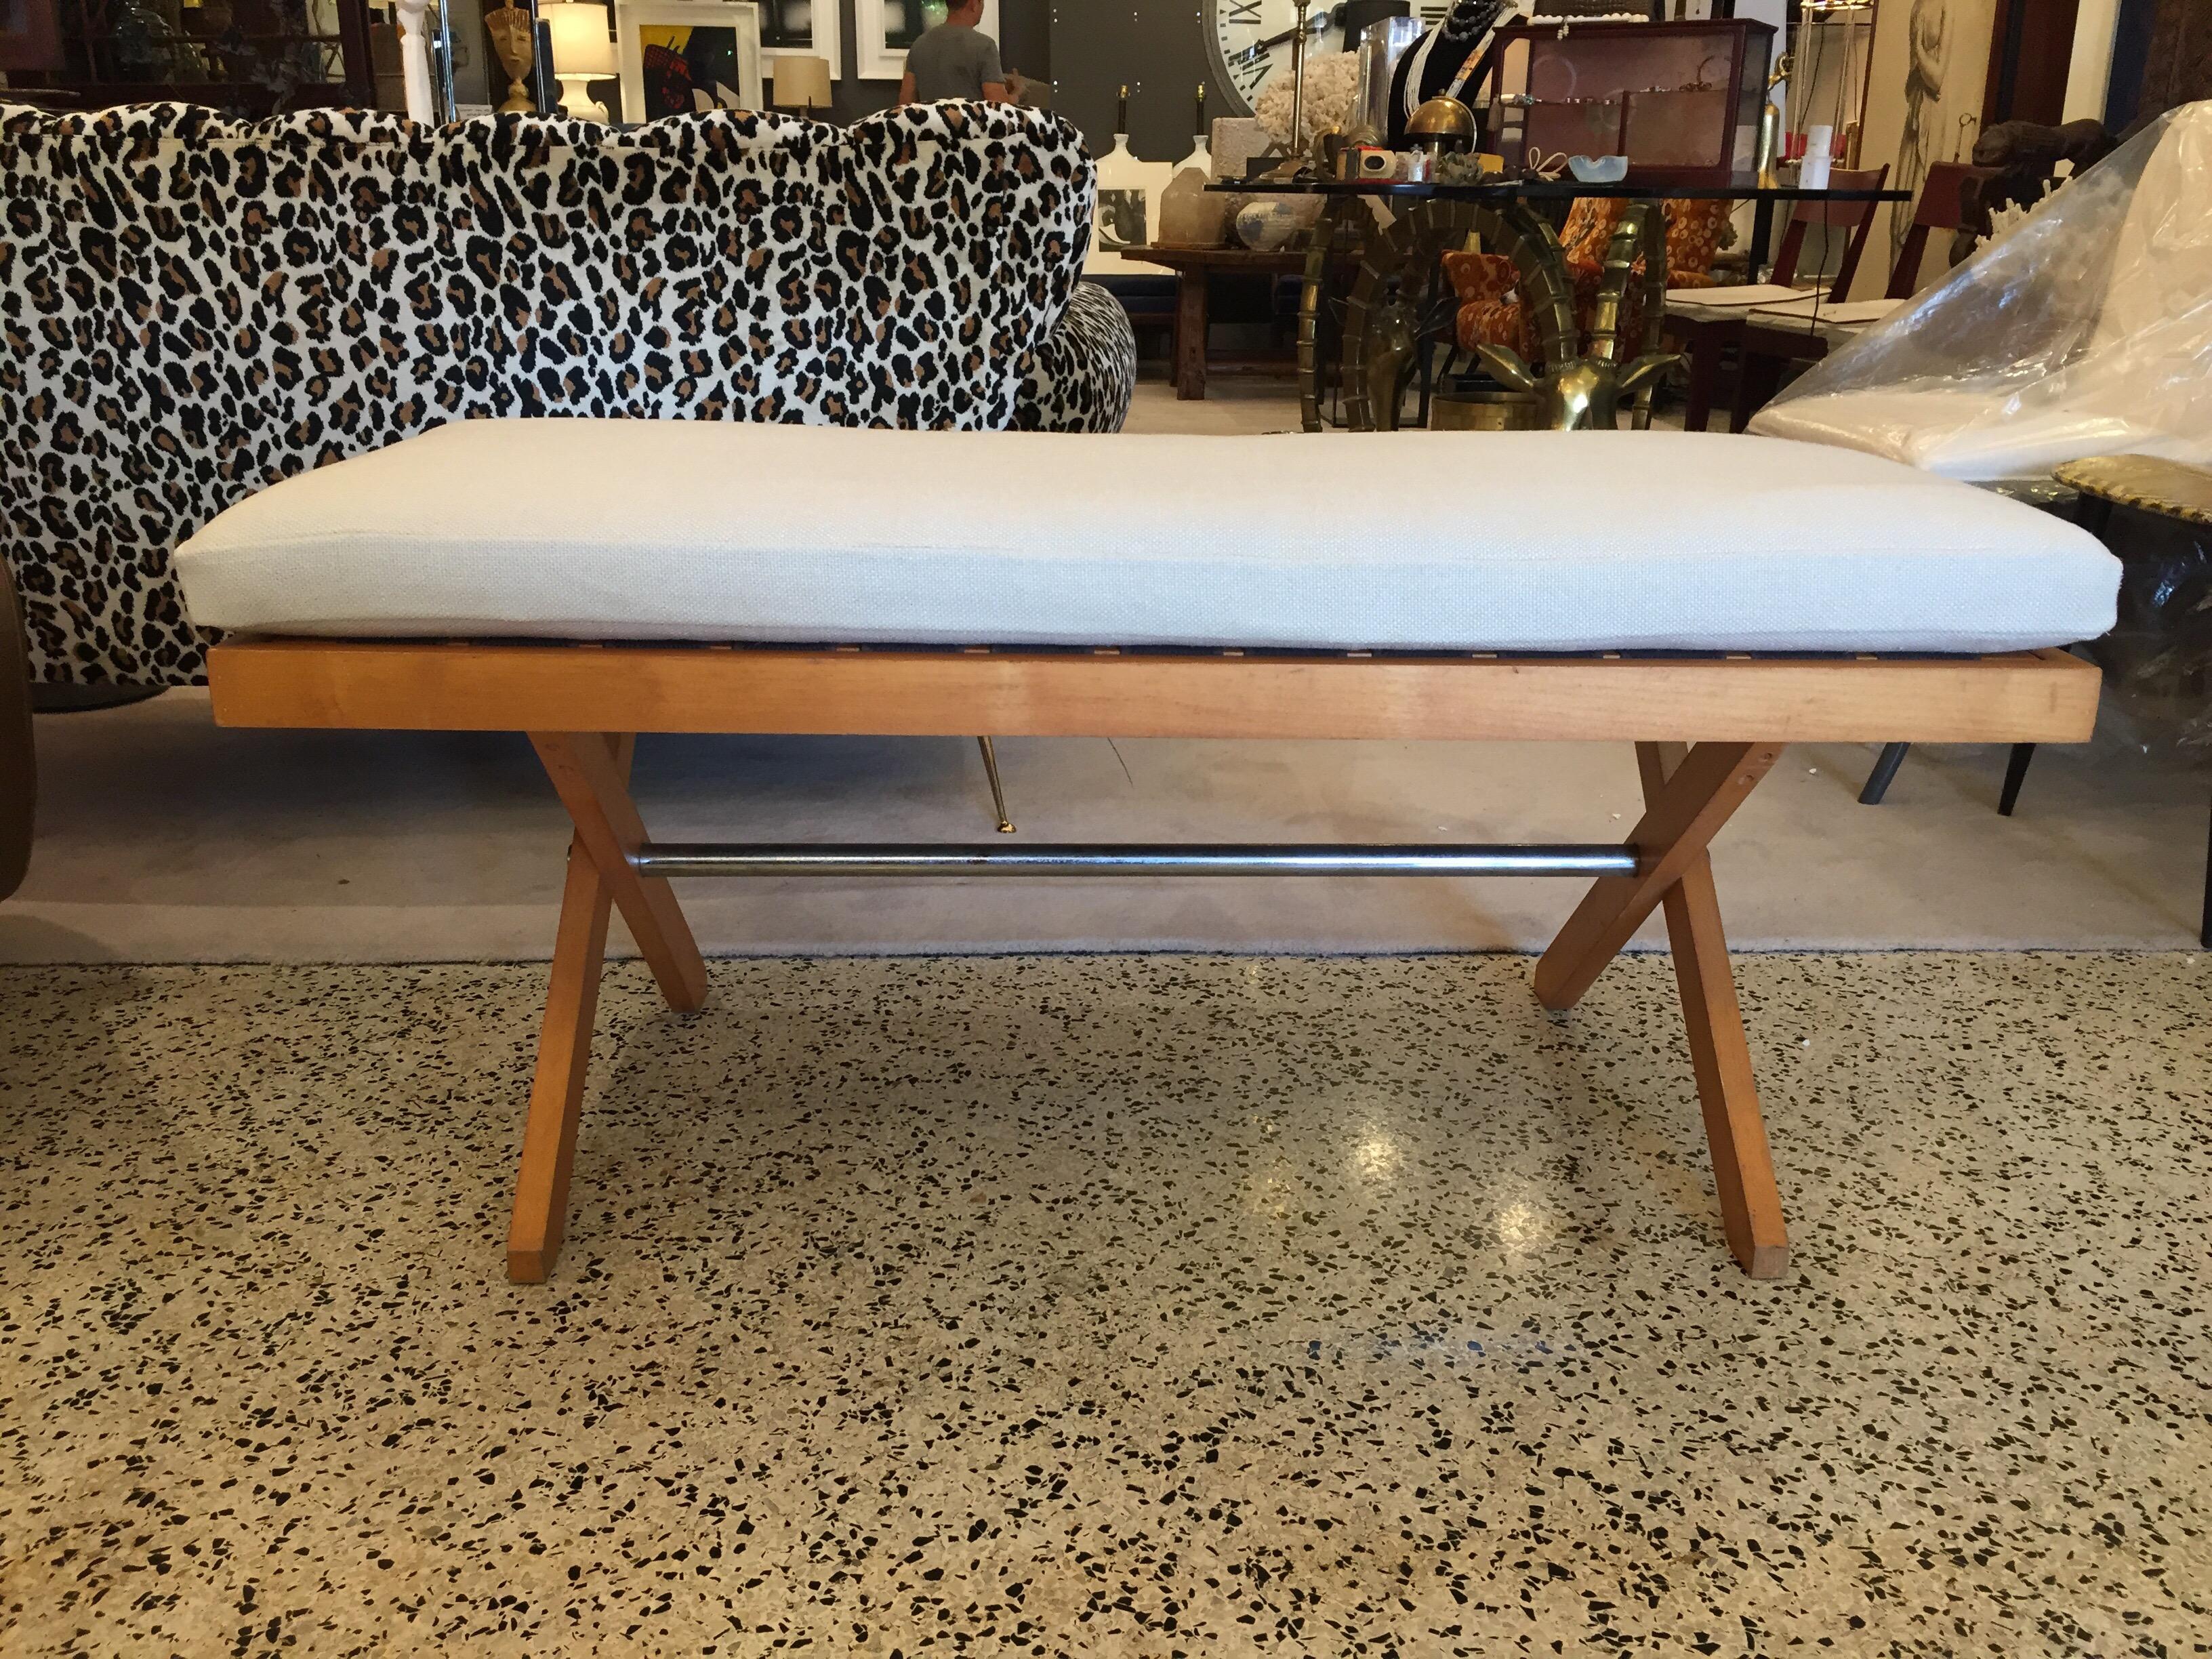 Rare vintage modern bench circa 1950s in the style of Pierre Jeanneret, loose pillow upholstered in an off-white padded natural fabric resting on x like legs and metal crossbar, with the original nylon webbing.